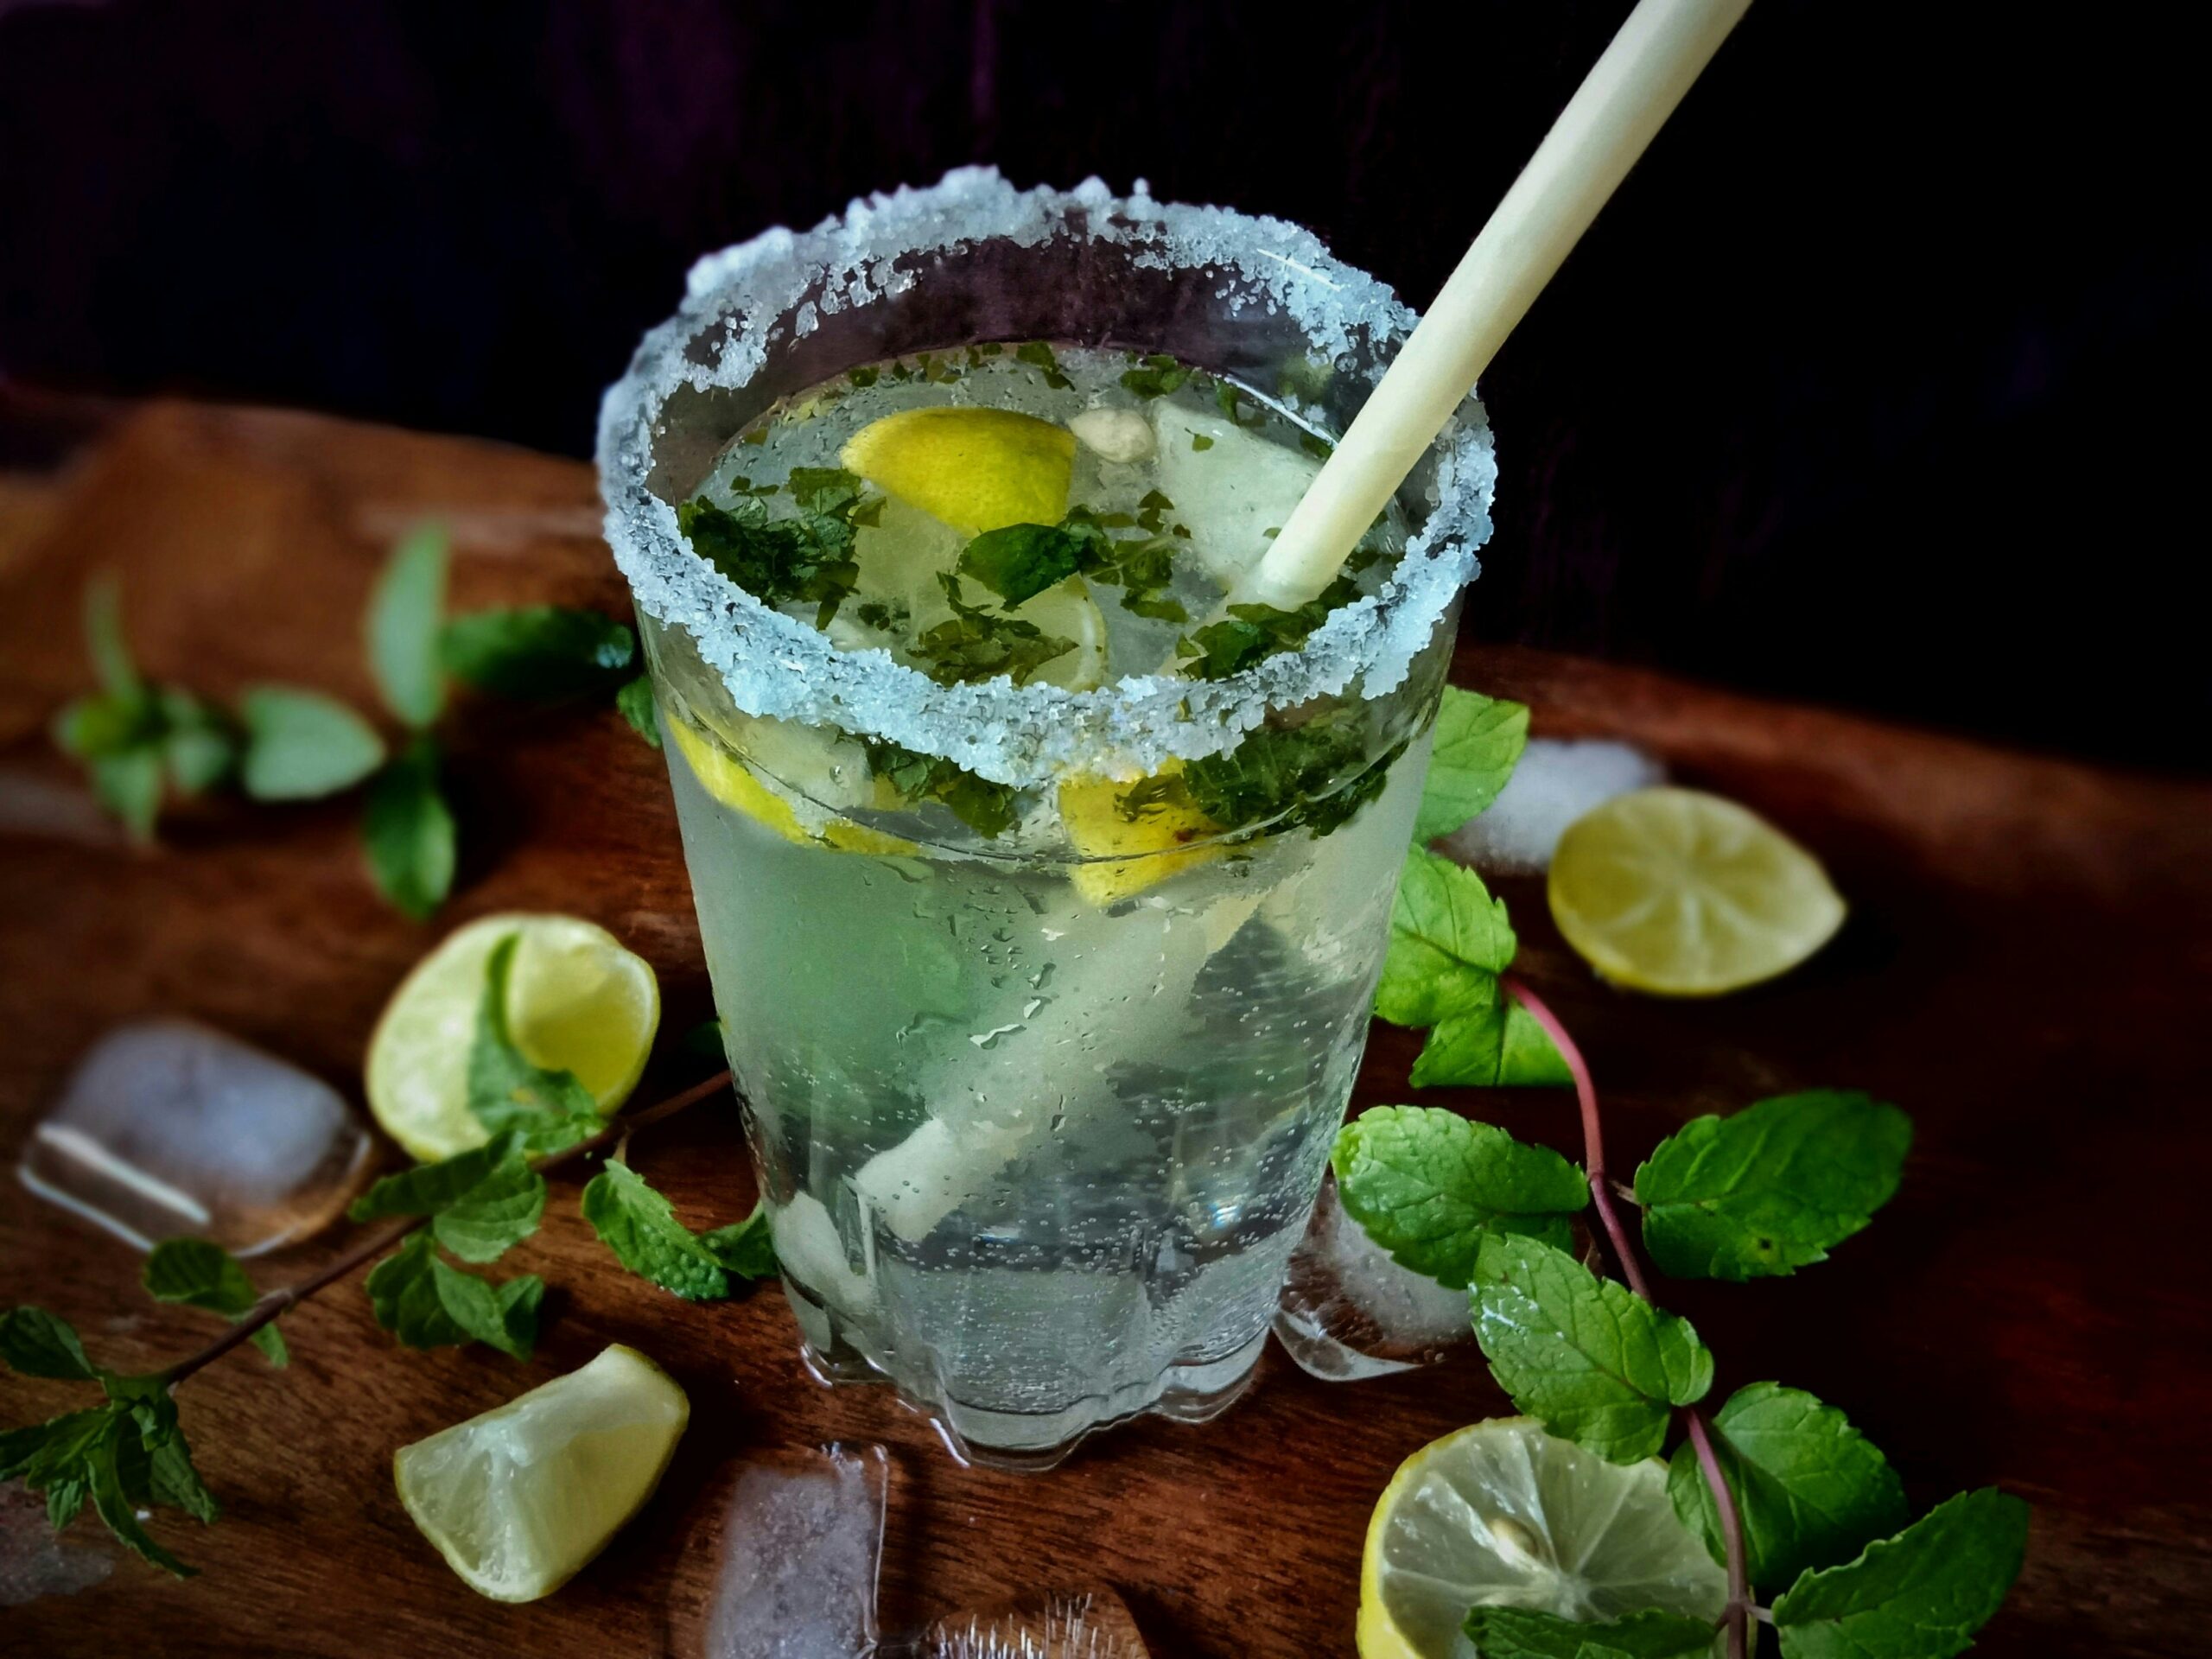 If you're wondering what mixes well with tequila, for starters mint and lime are great flavors. Pictured: A mojito